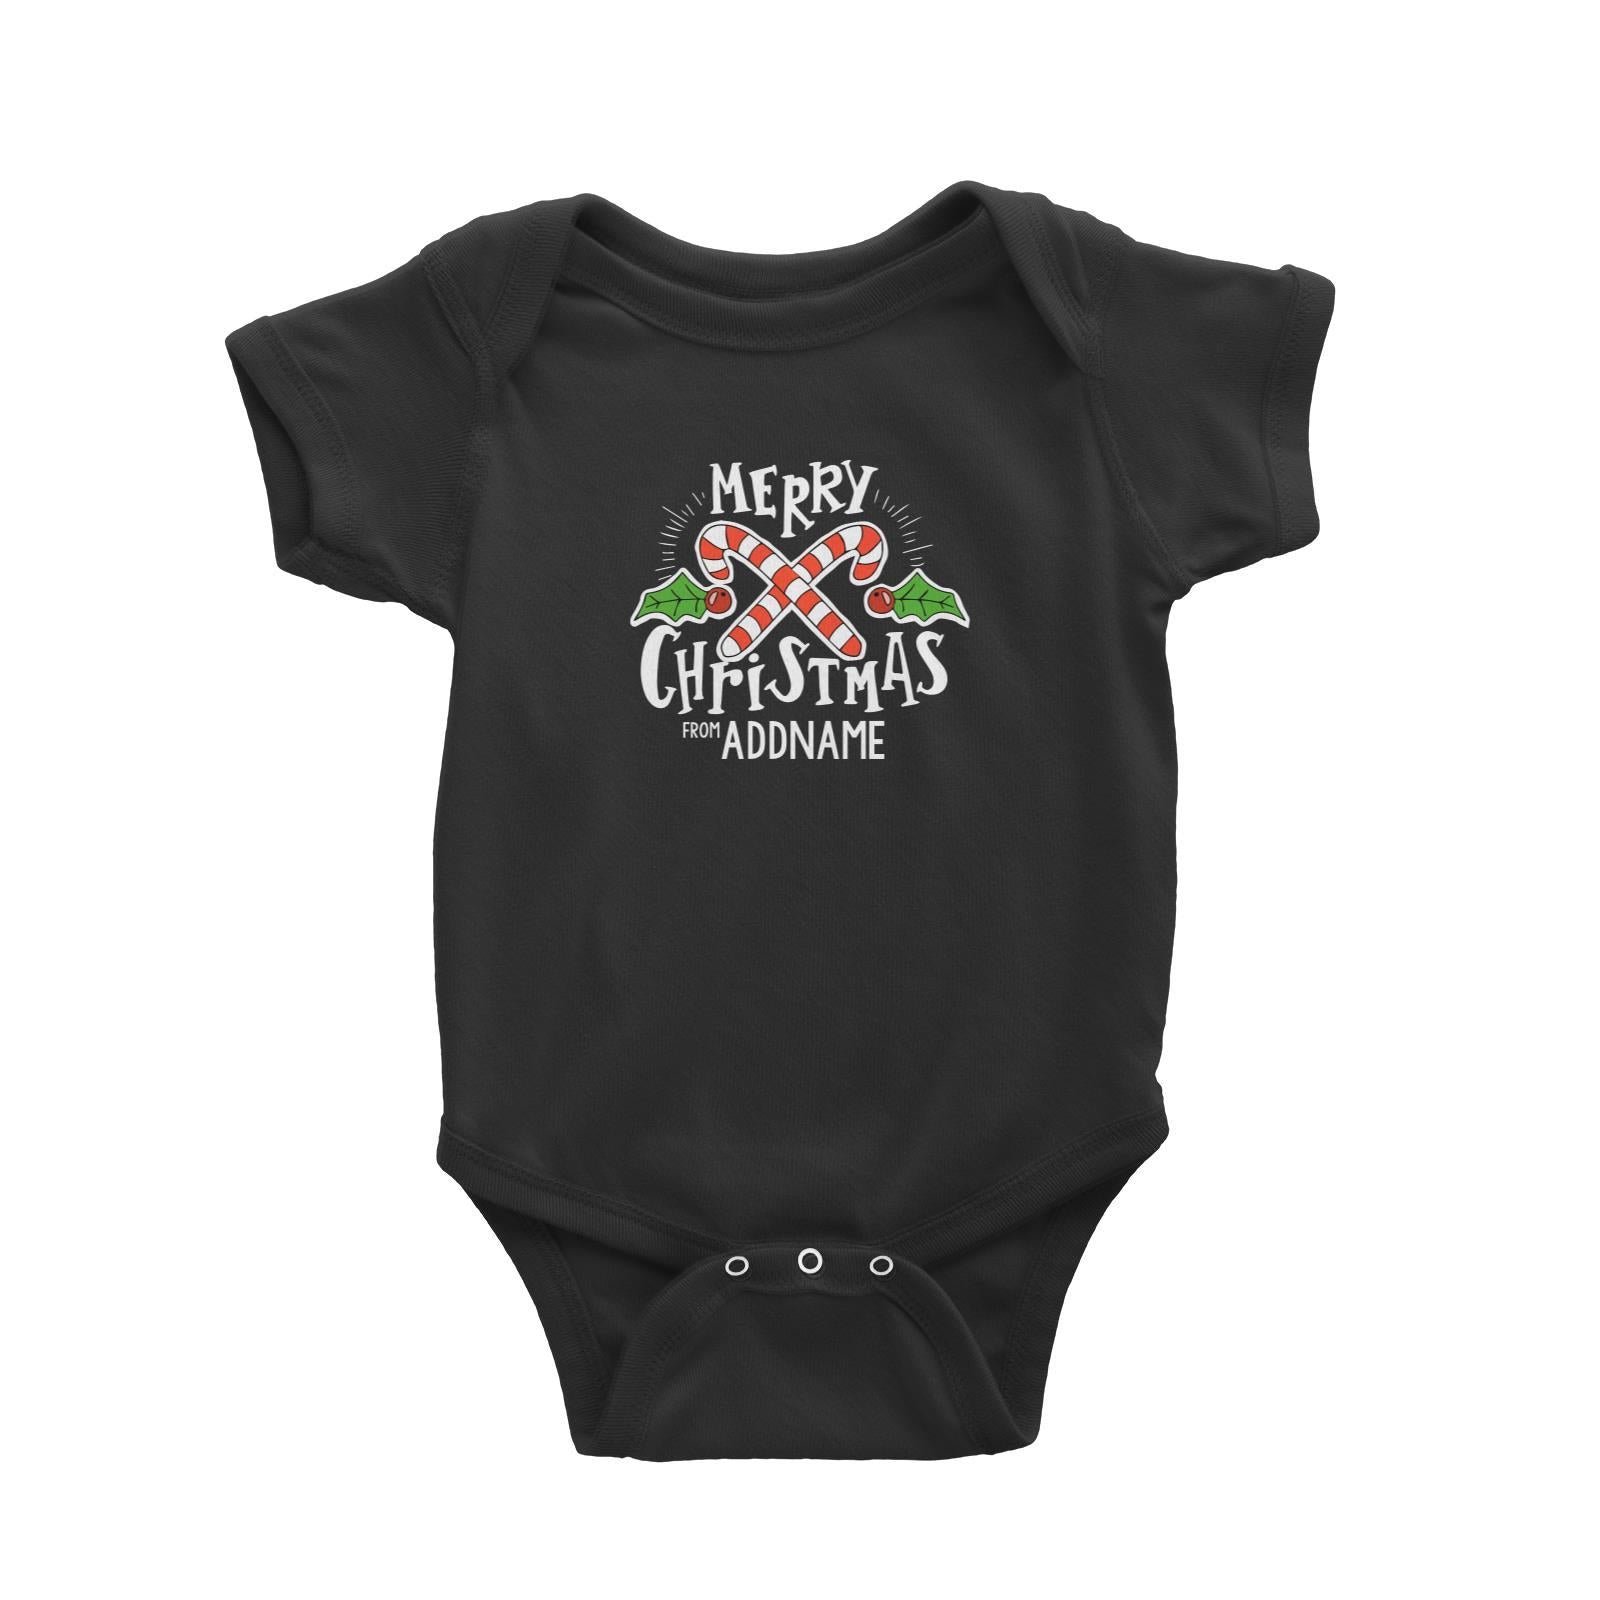 Merry Chrismas with Holly and Candy Cane Greeting Addname Baby Romper Christmas Matching Family Personalizable Designs Lettering